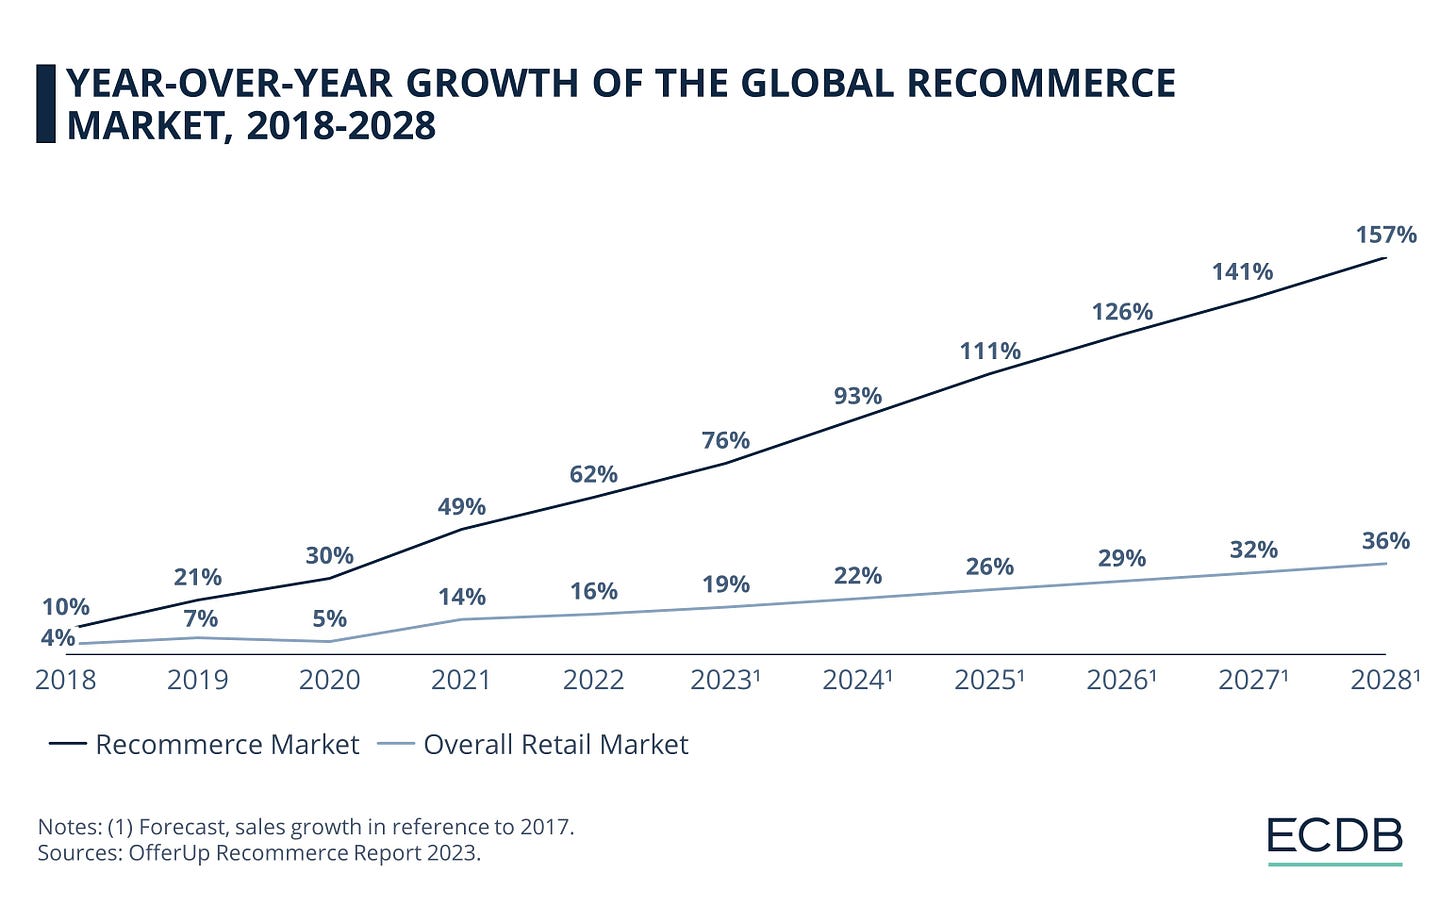 Year-Over-Year Growth of the Global Recommerce Market, 2018-2028